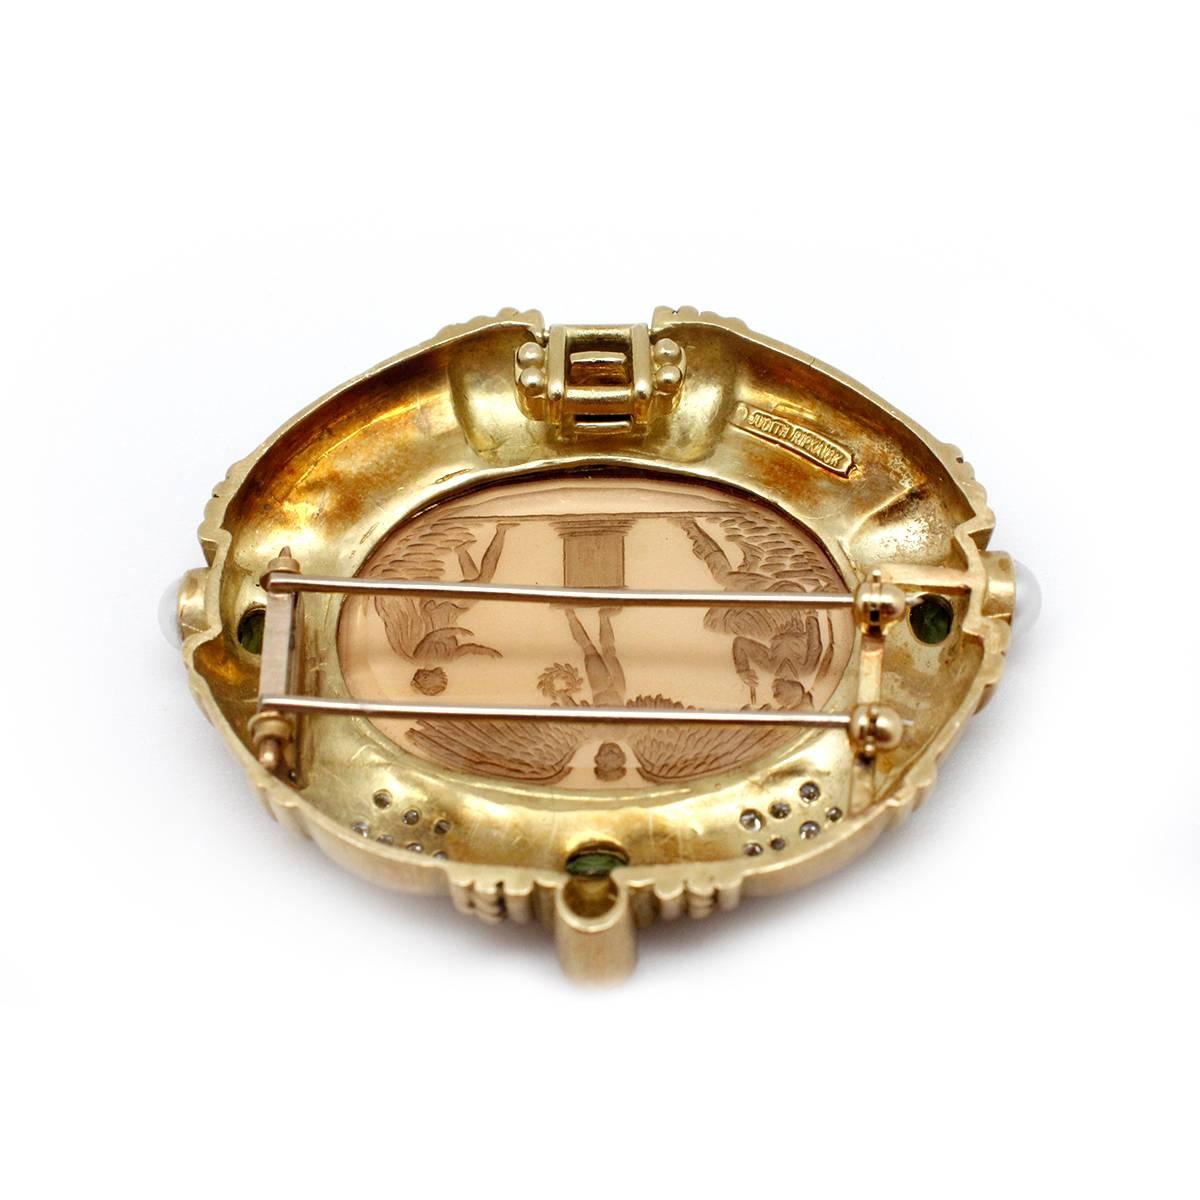 This pin is crafted in 18kt yellow gold by famous designer Judith Ripka. At it's center piece is an expertly hand carved oval intaglio citrine stone that measures 35mmx25mm. In addition the pendant features two pearls, four bezel set peridot stones